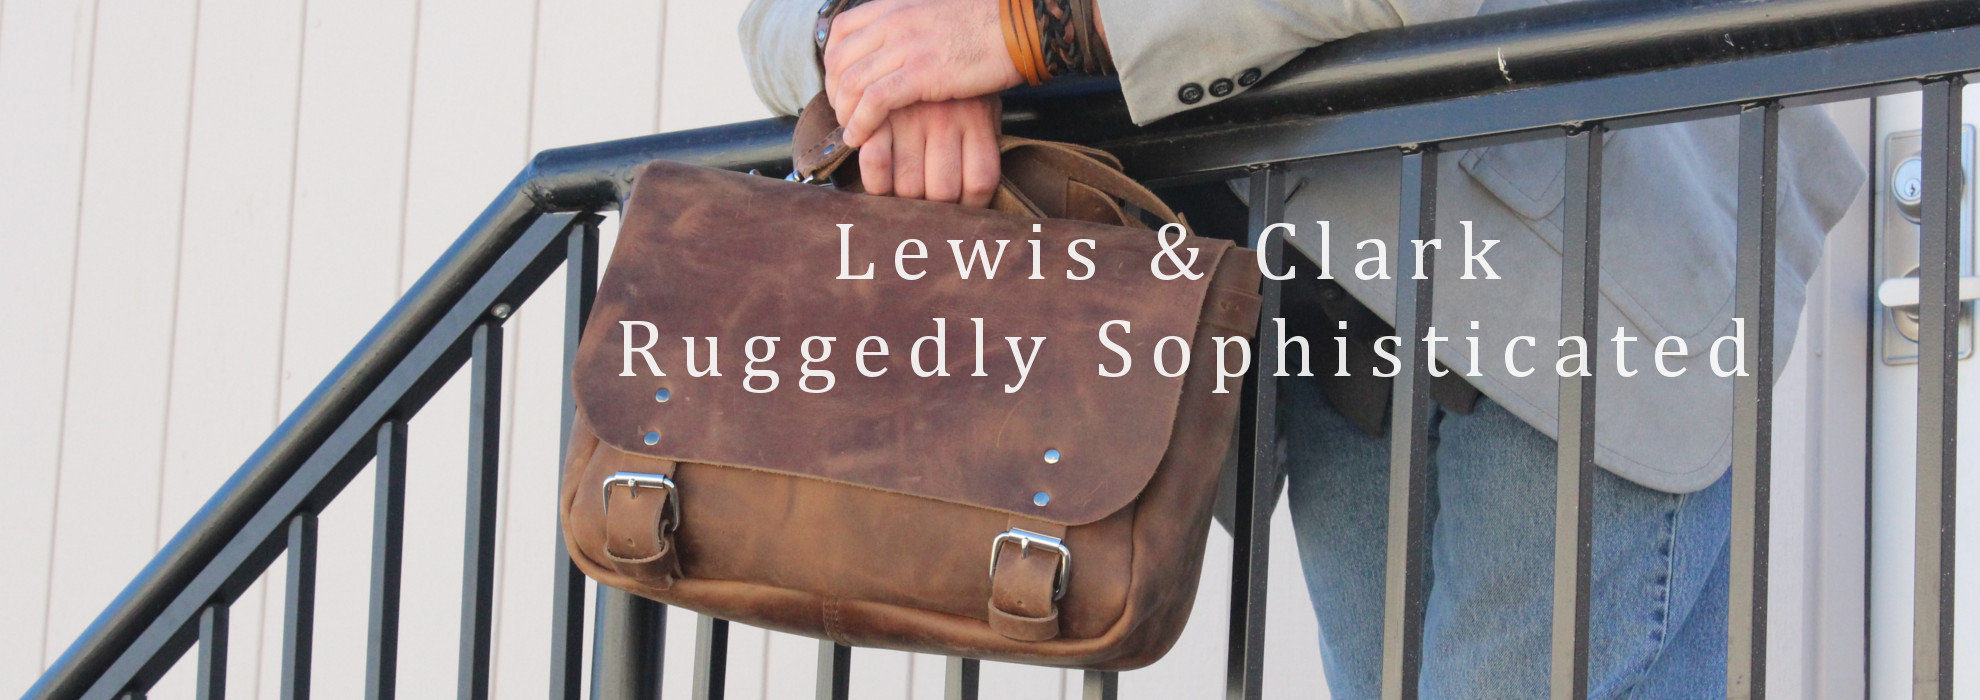 Leather Briefcase - Red Clouds Collective - Made in the USA